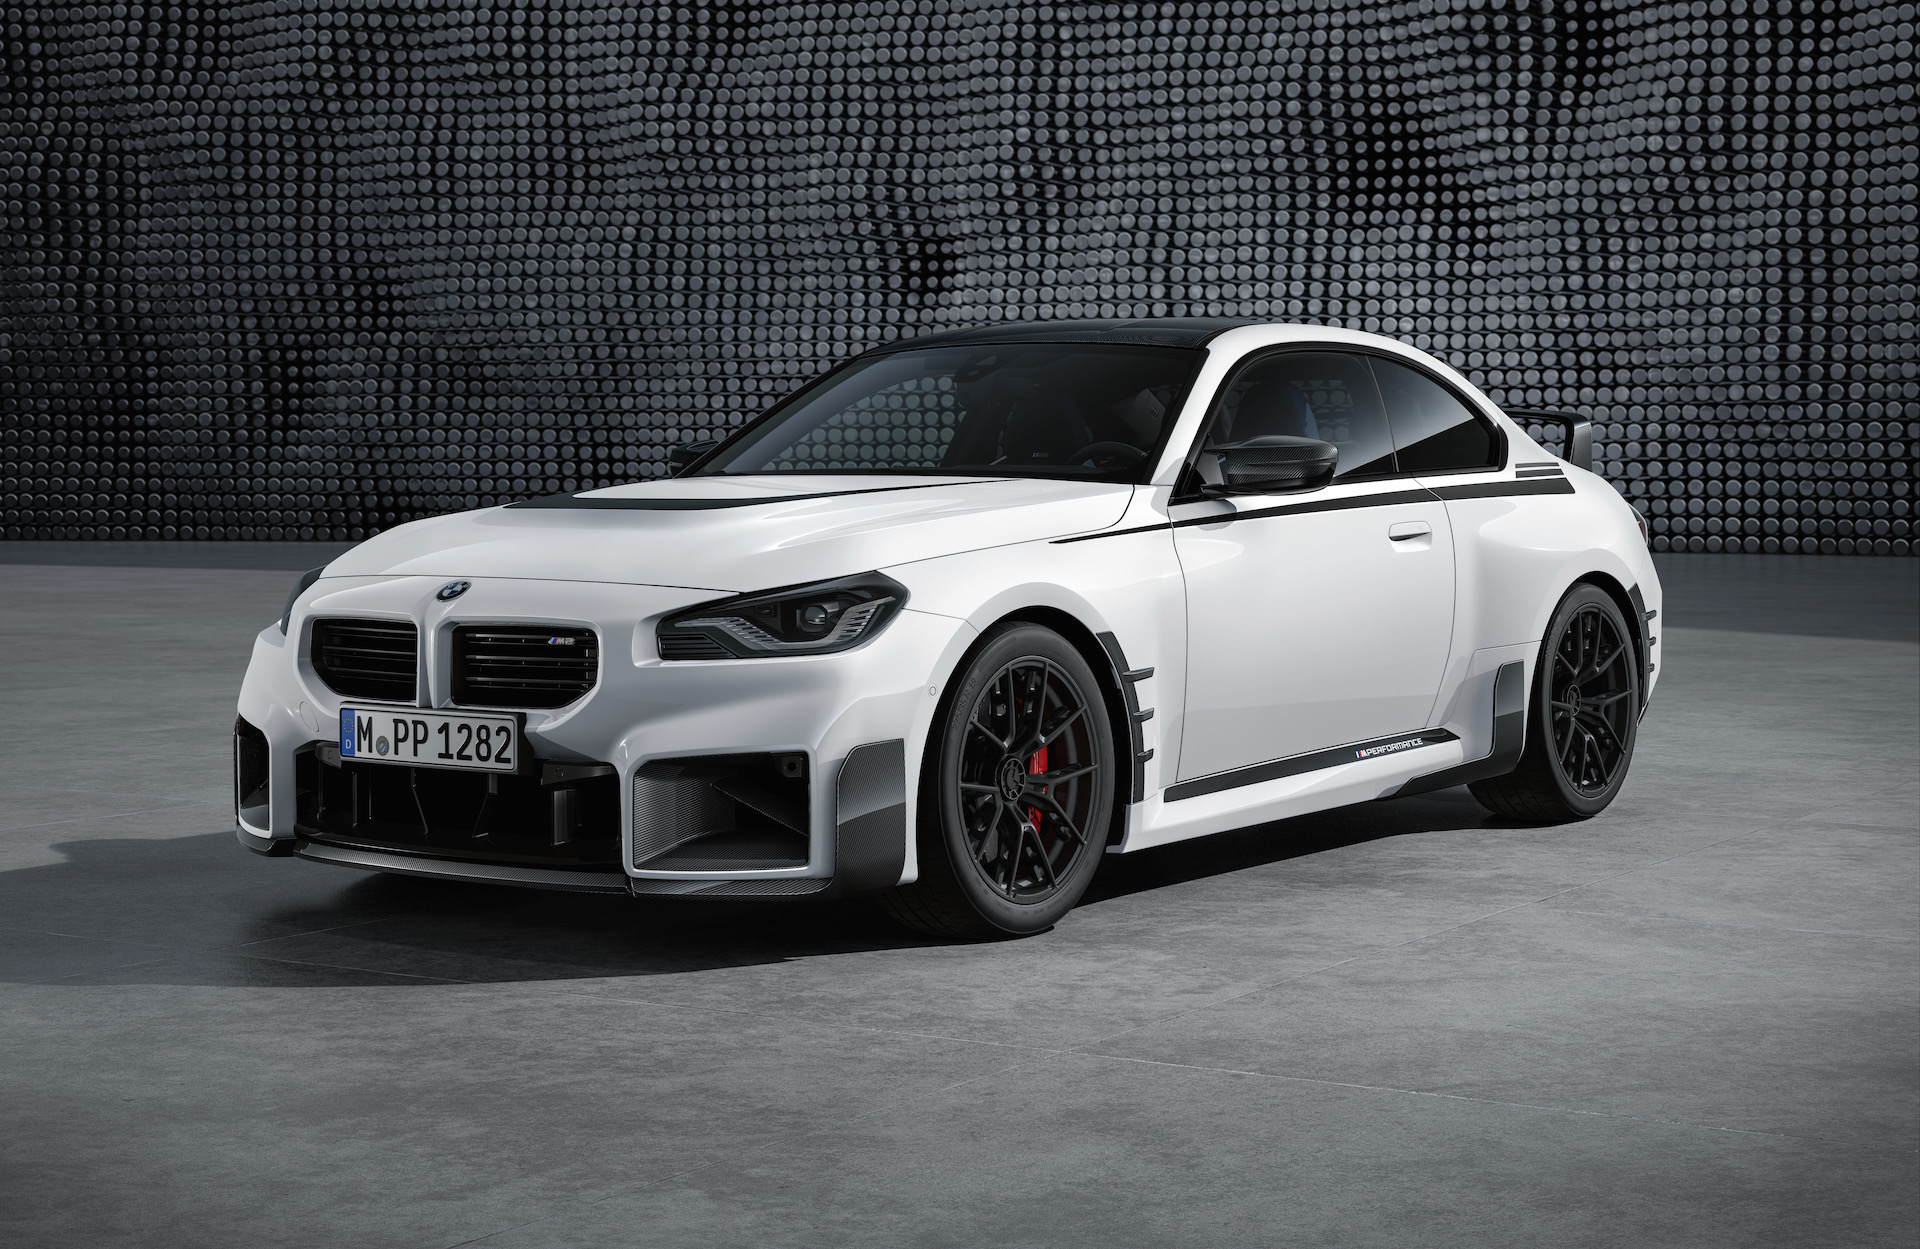 BMW shows off M Performance parts that will be available for new M2